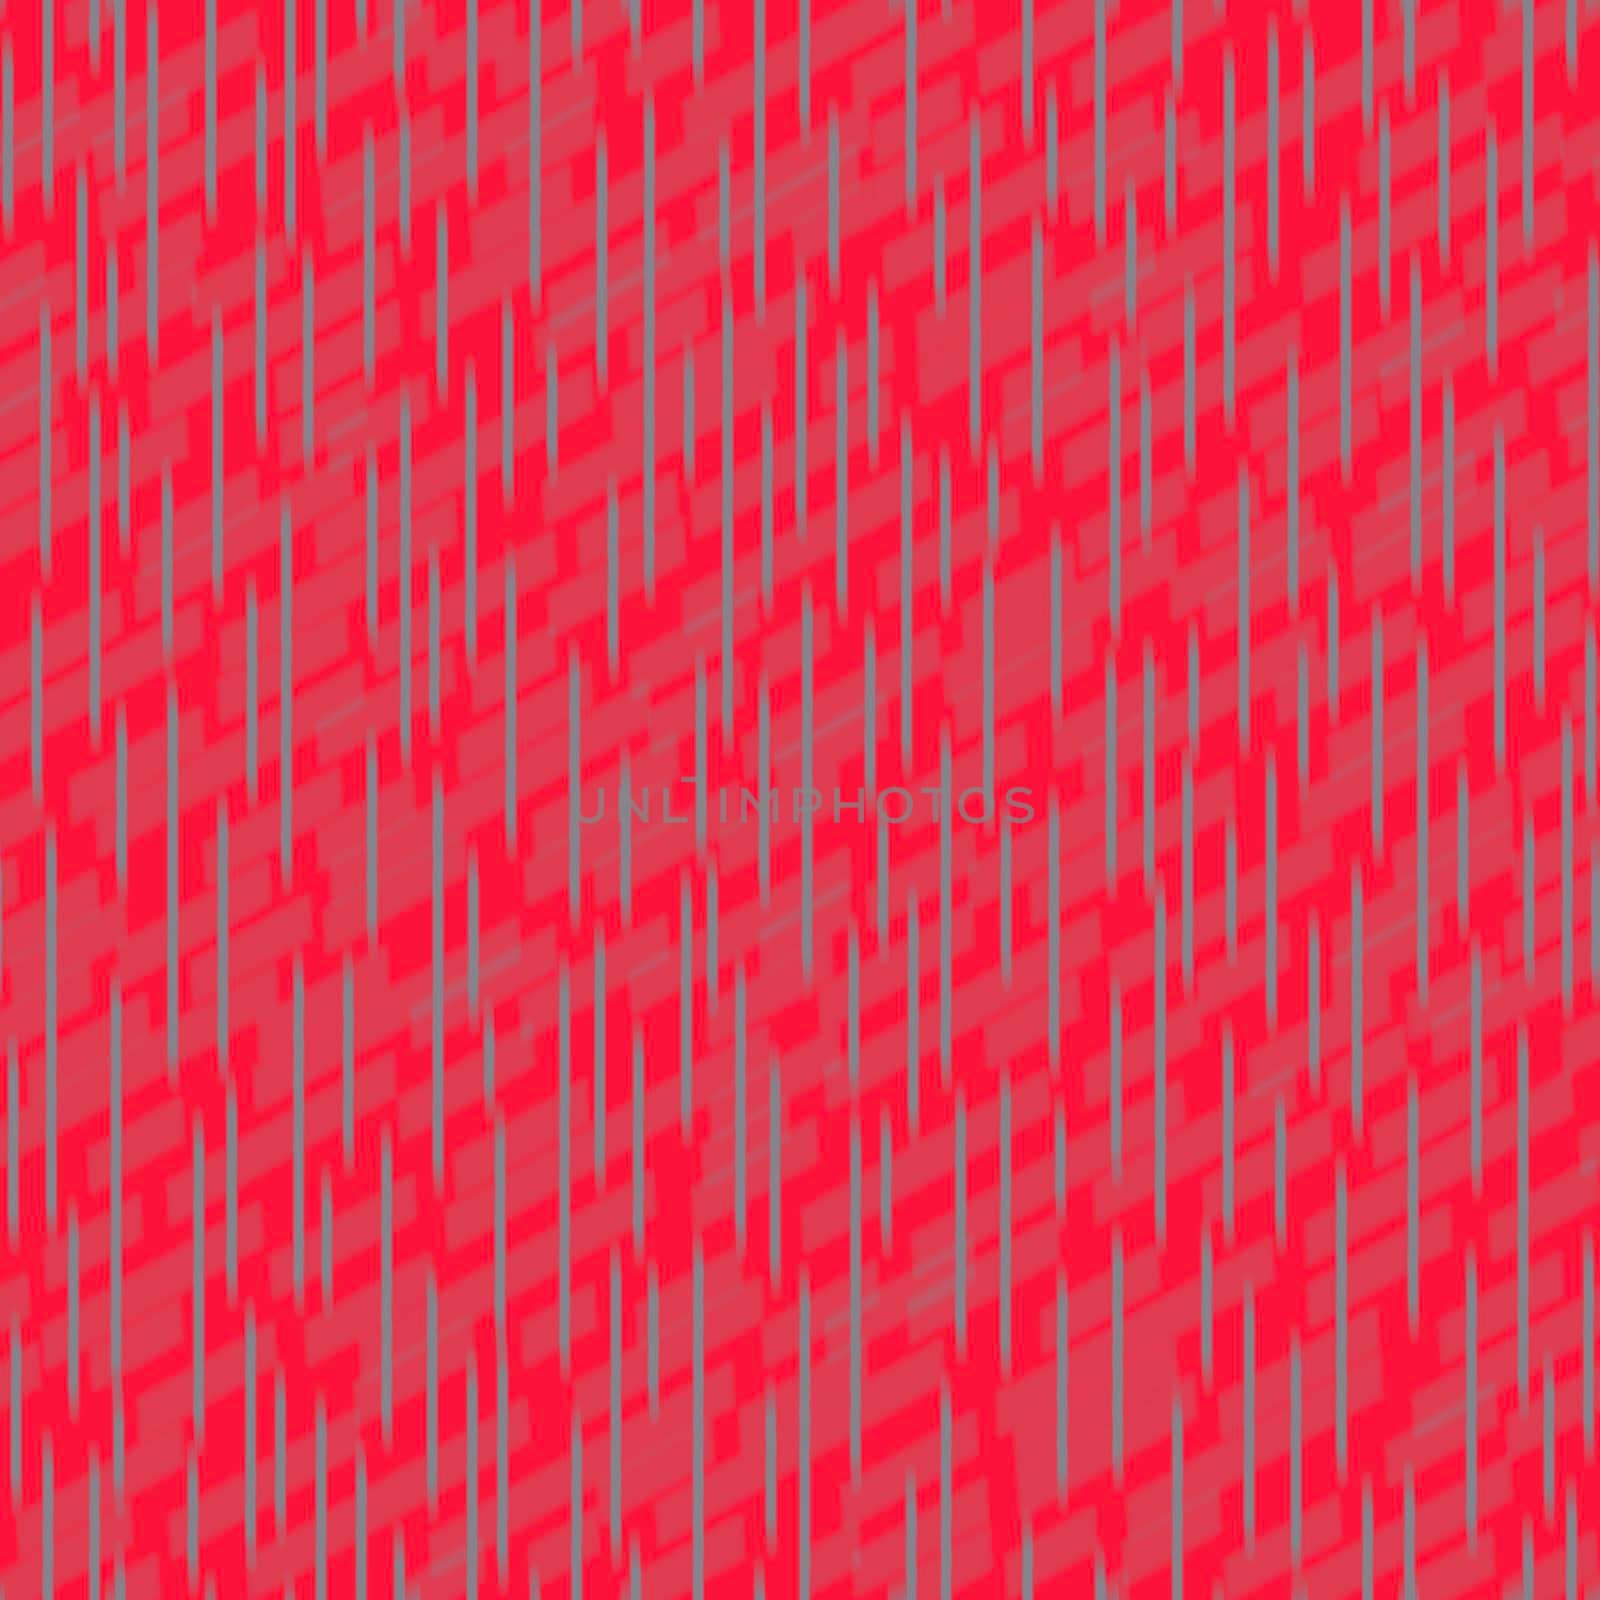 Randomly crossing lines making pattern.Chaotic short lines seamless pattern,chips and sticks modern repeatable motif.Good for print, textile,fabric, background, wrapping paper.Red azure colors by Angelsmoon